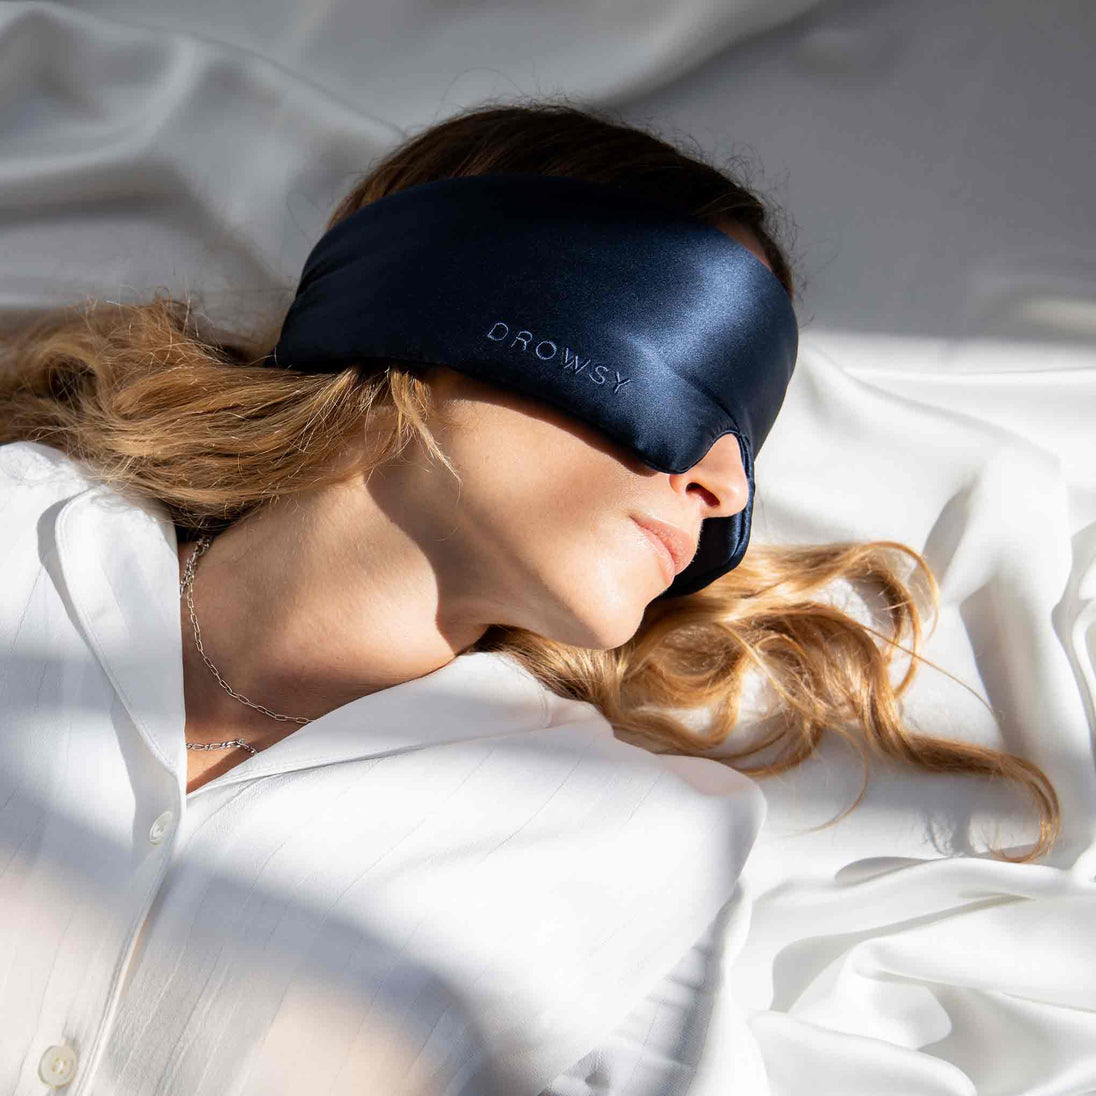 s Best-Selling Sleep Mask is Now on Sale